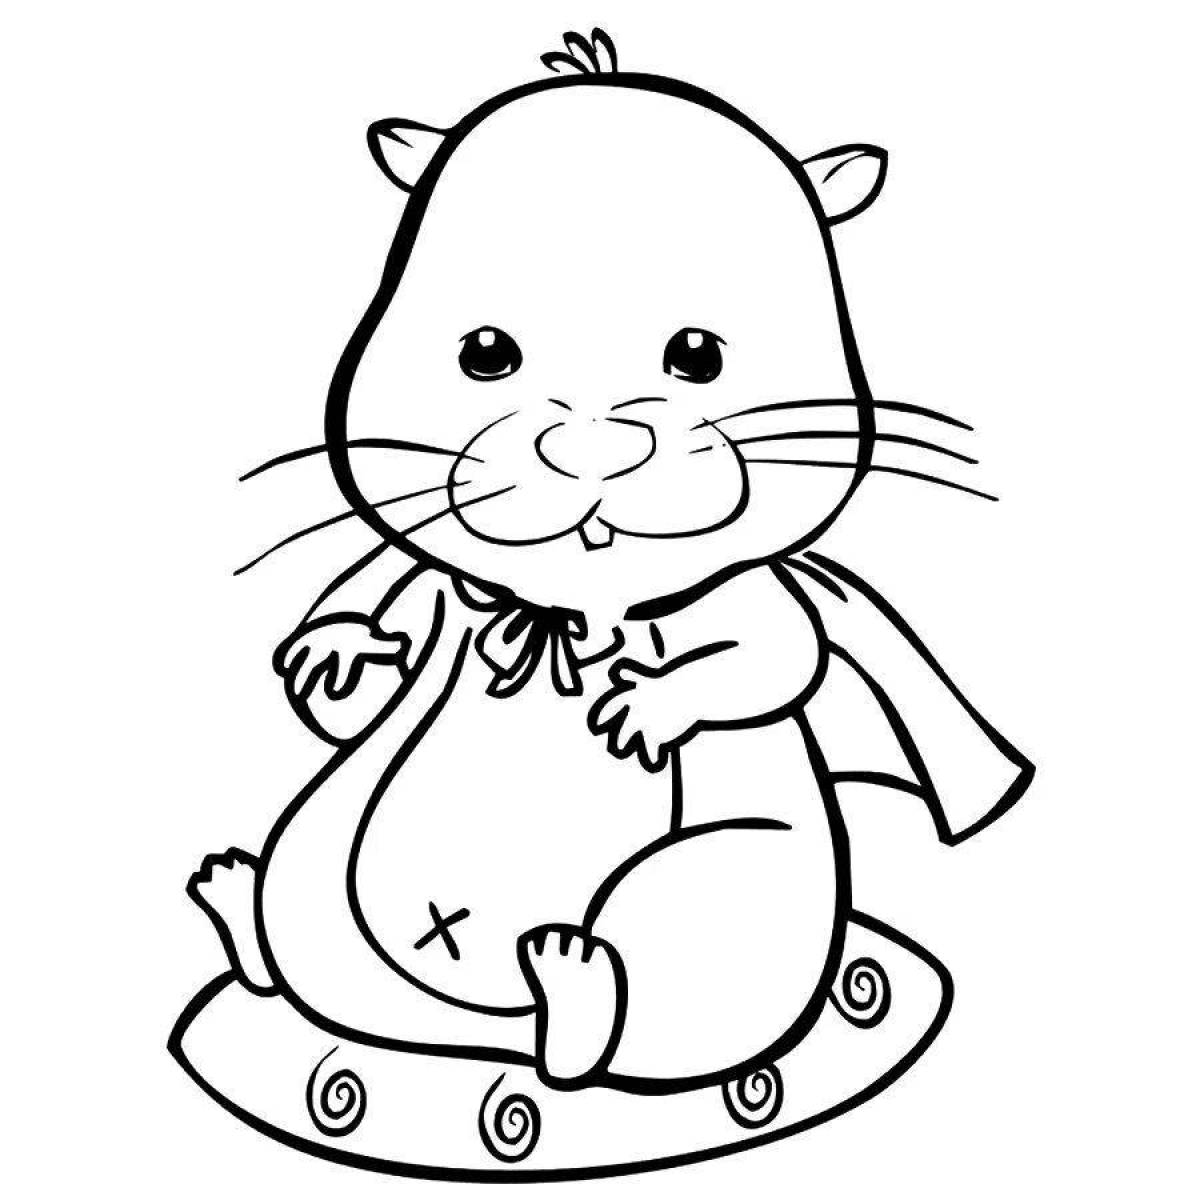 Adorable hamster coloring page for kids